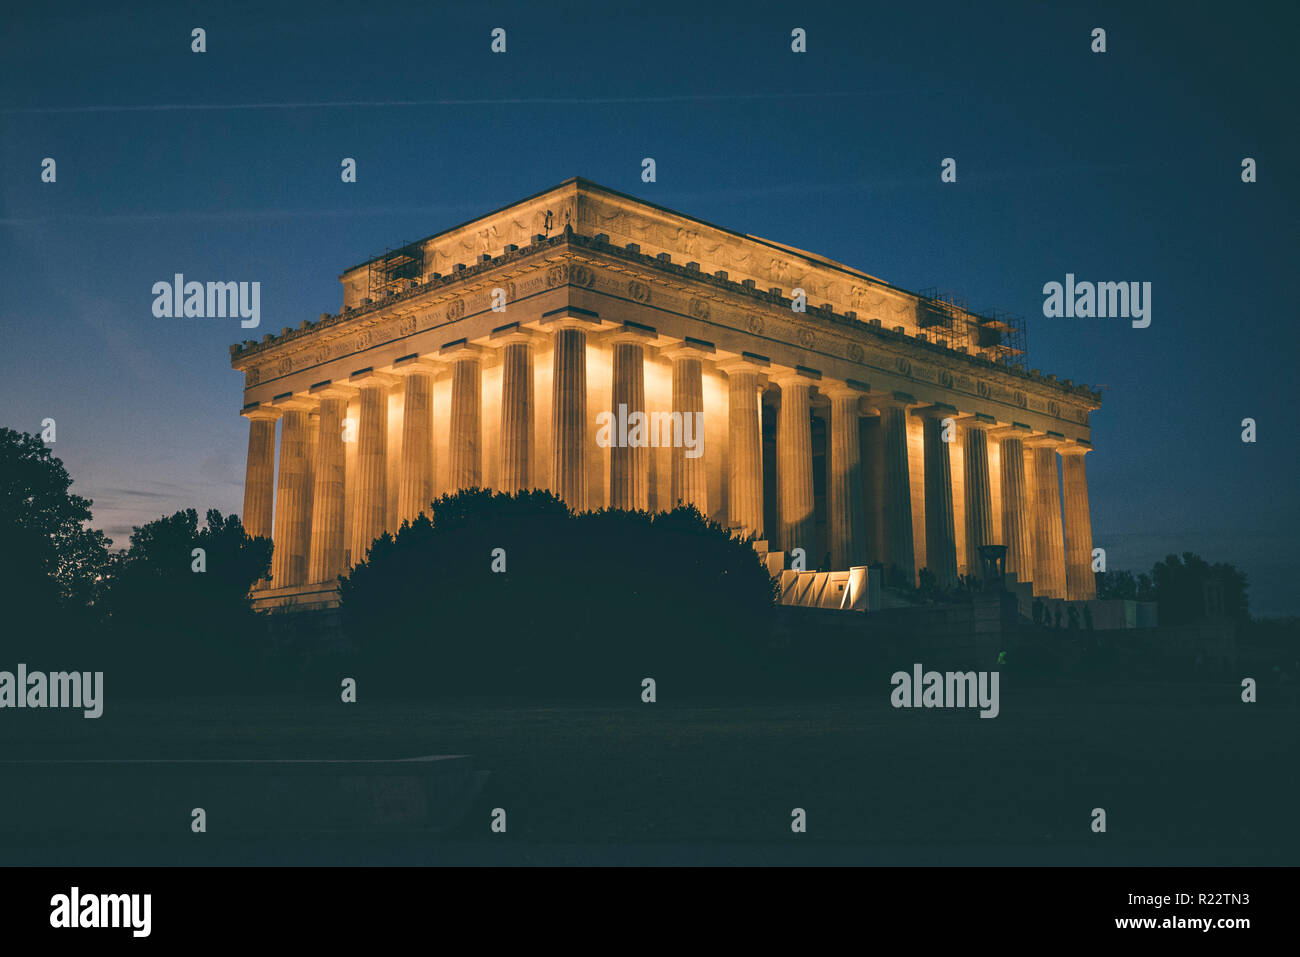 Night view of the Lincoln Memorial in Washington D.C. Stock Photo